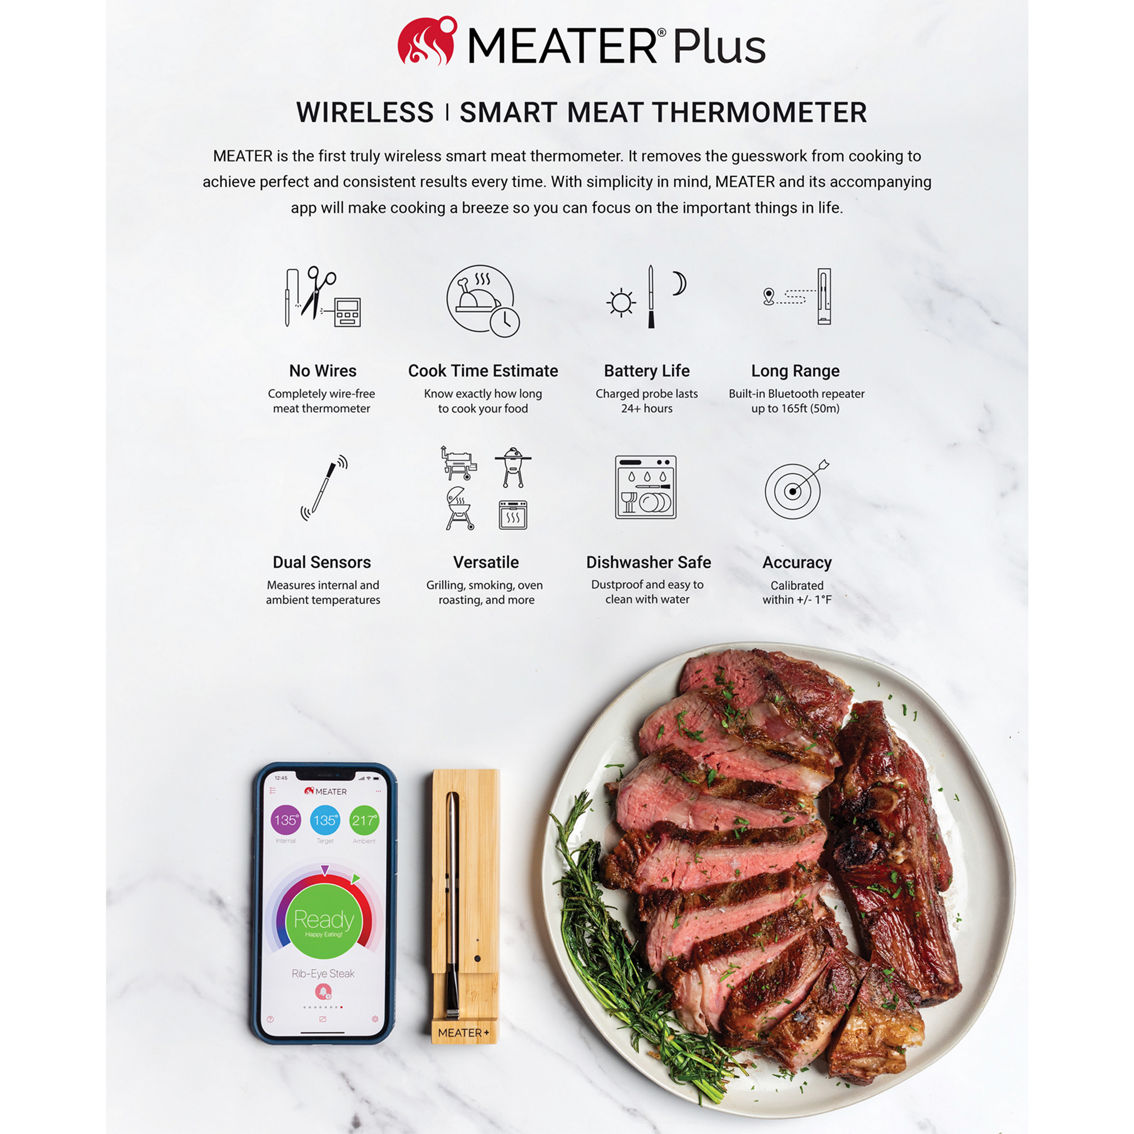 Traeger Meater Plus Wireless Meat Thermometer - Image 2 of 6